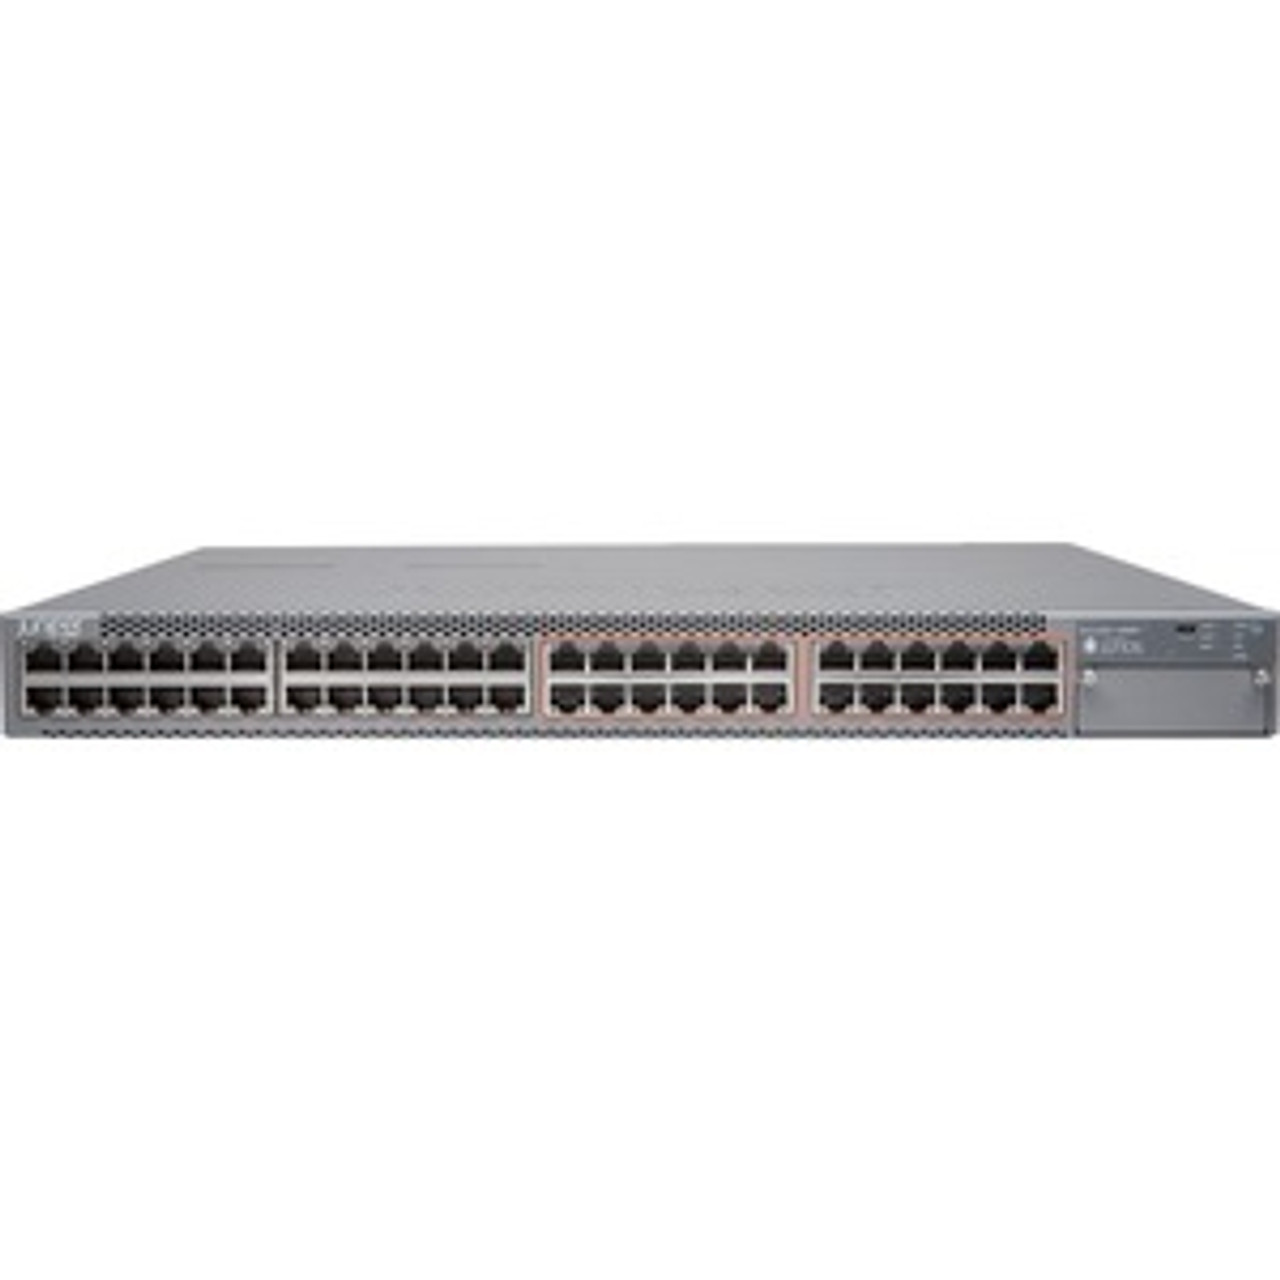 B-EX4300-48MP-5S-E Juniper EX4300-48MP Ethernet Switch - 48 Ports - Manageable - 3 Layer Supported - Modular - Twisted Pair, Optical Fiber - 1U High - Rack-mountable,